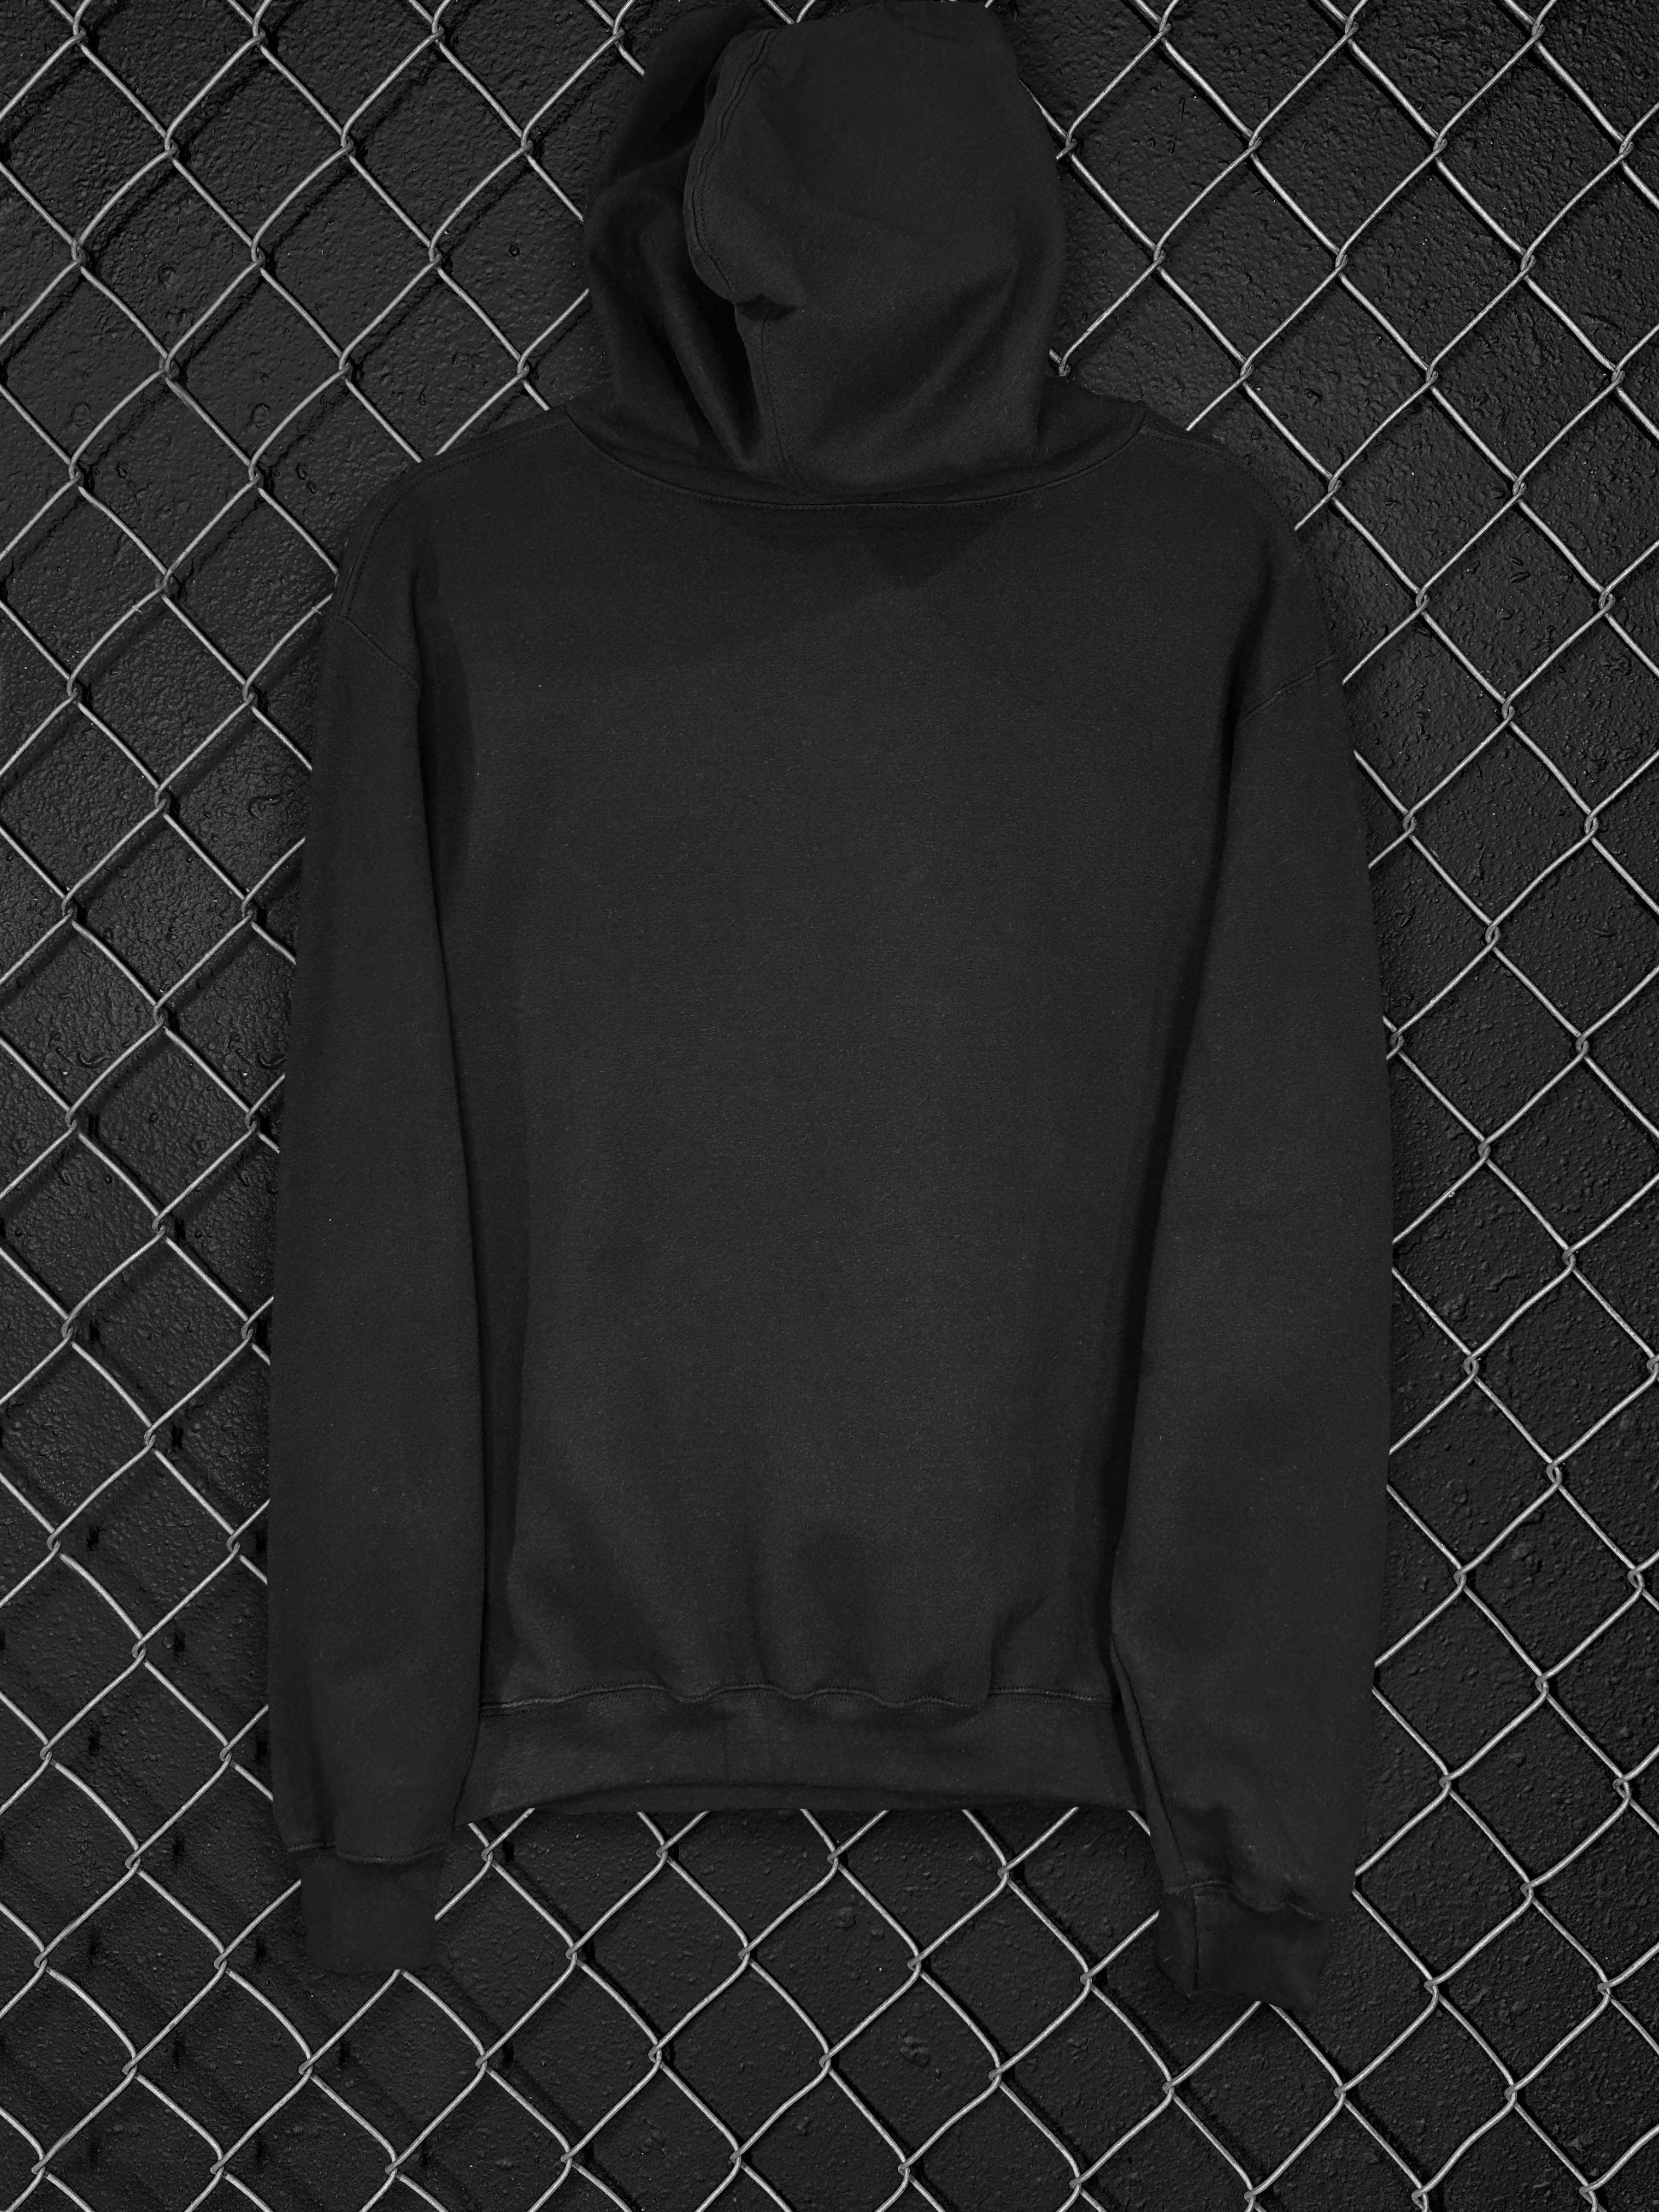 TOO DRIVEN HOODIE - The Drive Clothing